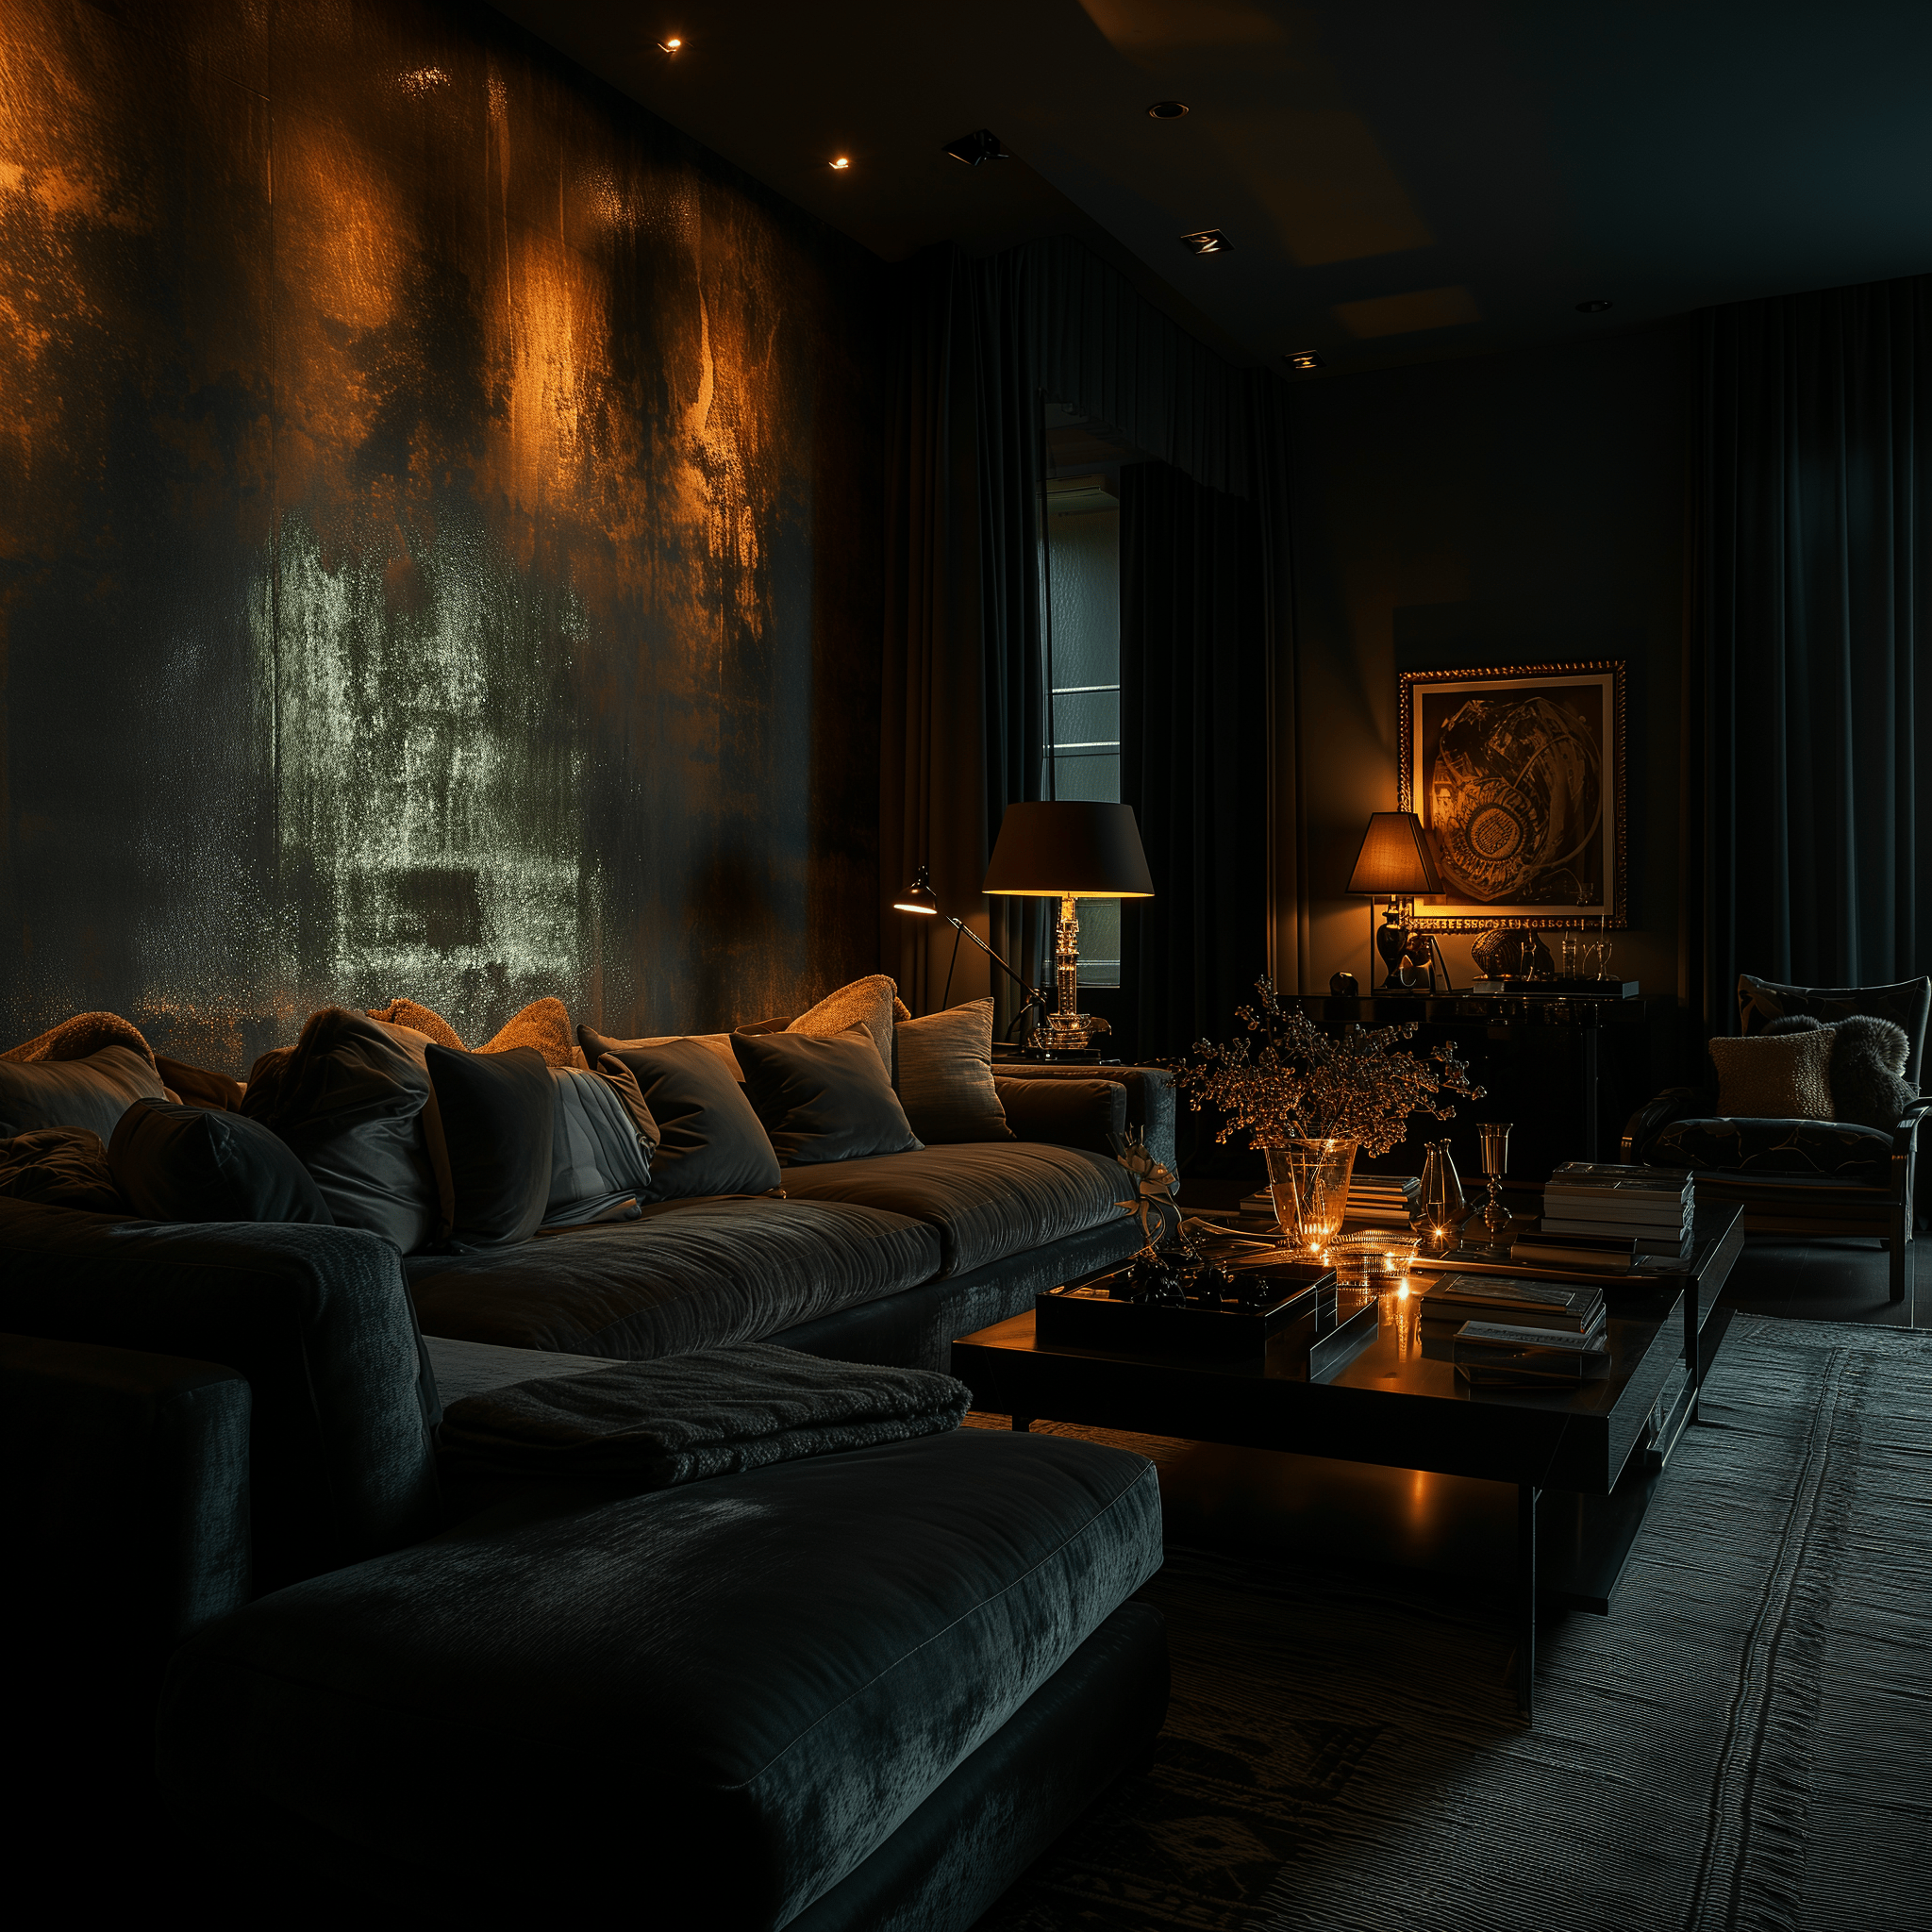 Real estate photo capturing a dark living room with eye-level architectural features, enhanced by rich, moody lighting and plush textiles.